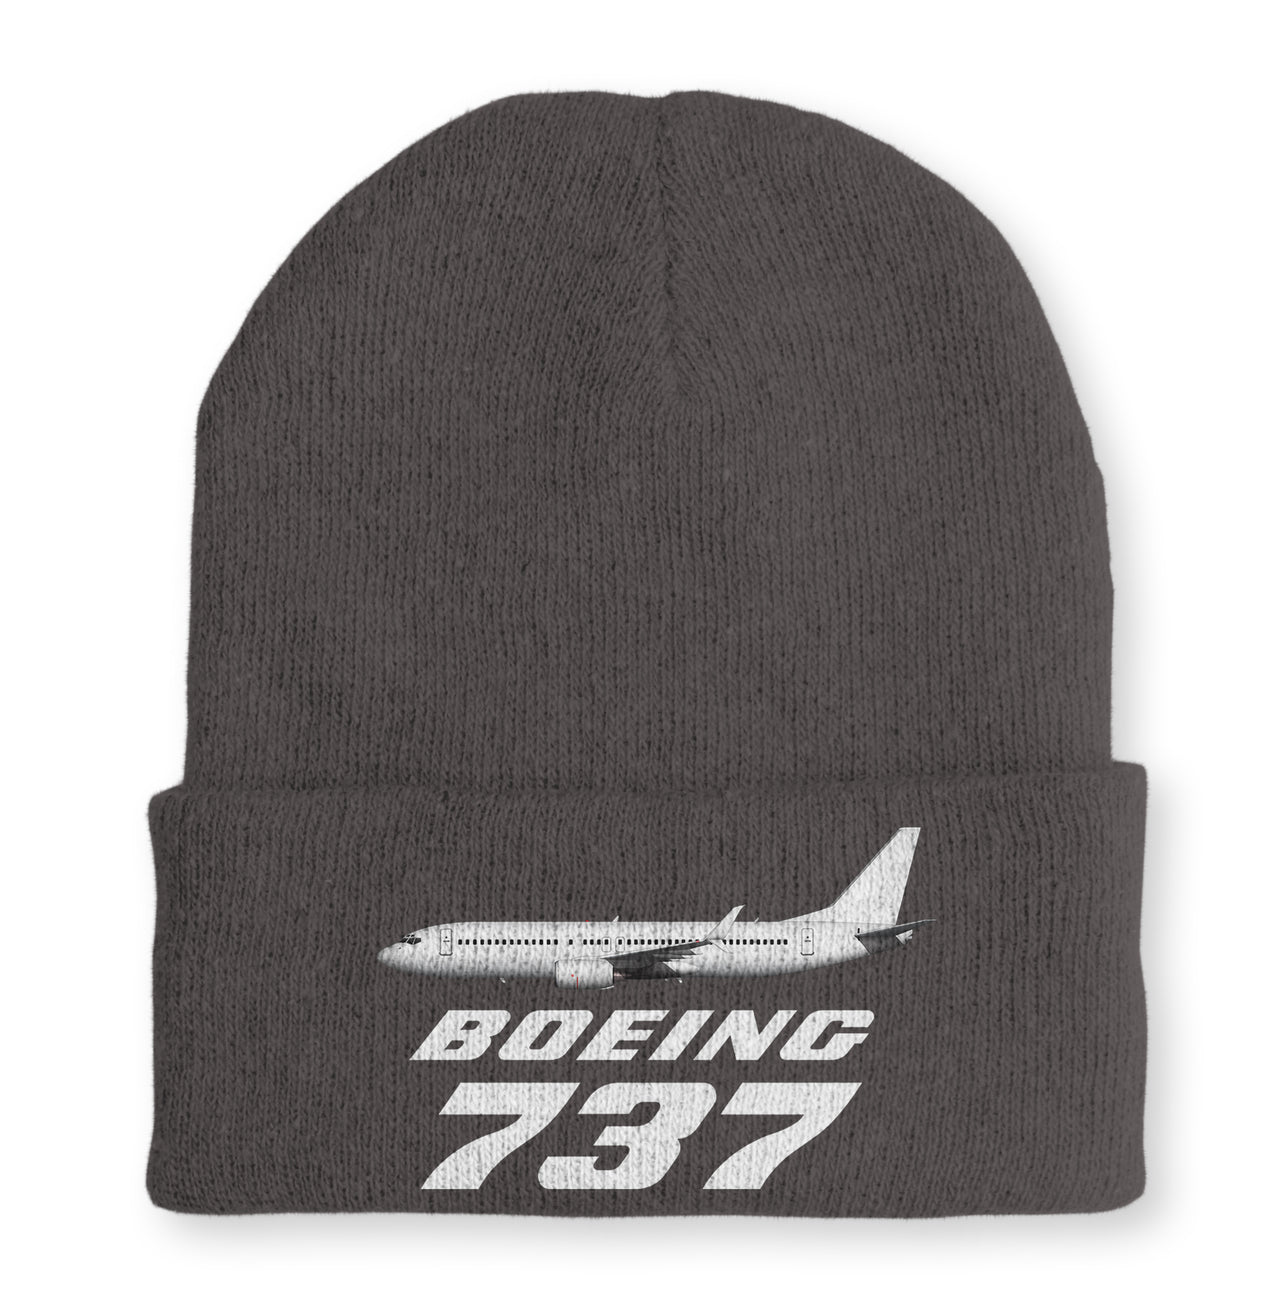 The Boeing 737 Embroidered Beanies